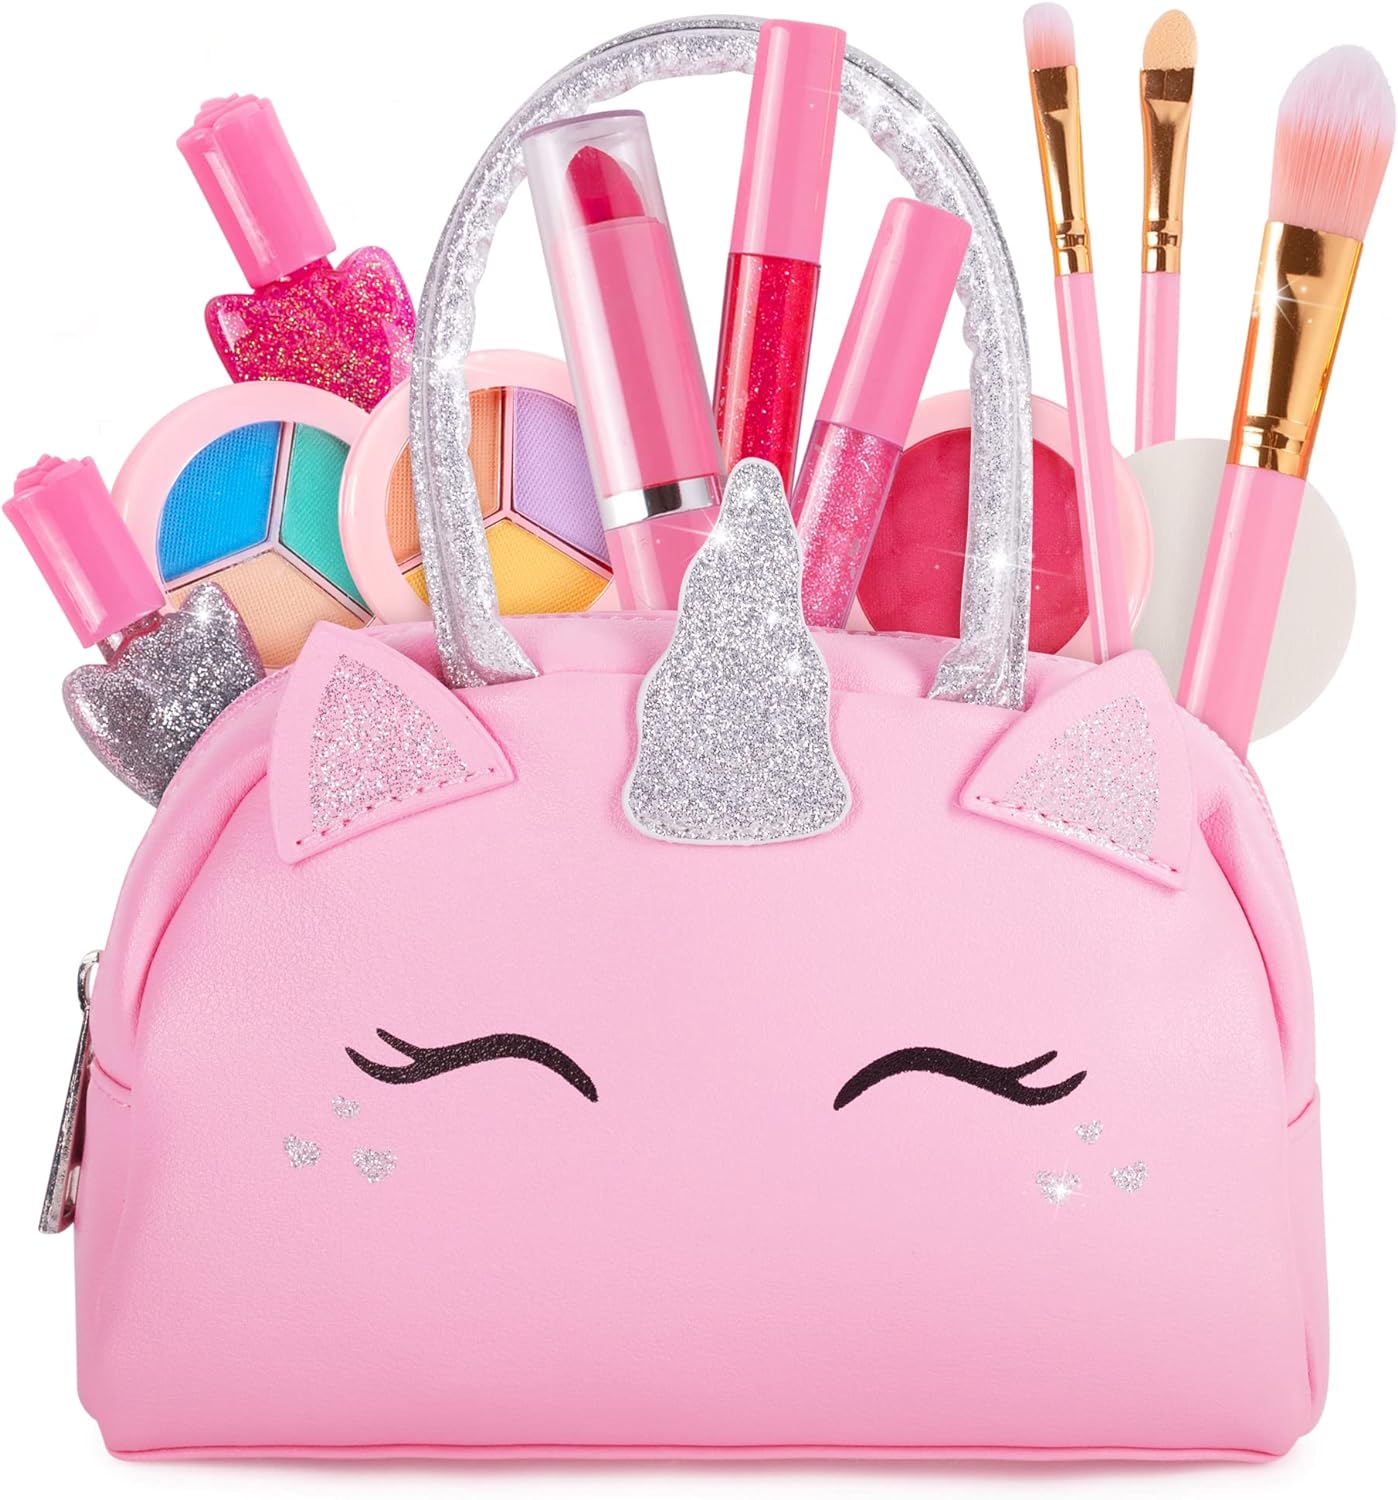 gifts-for-5-year-old-girls-makeup